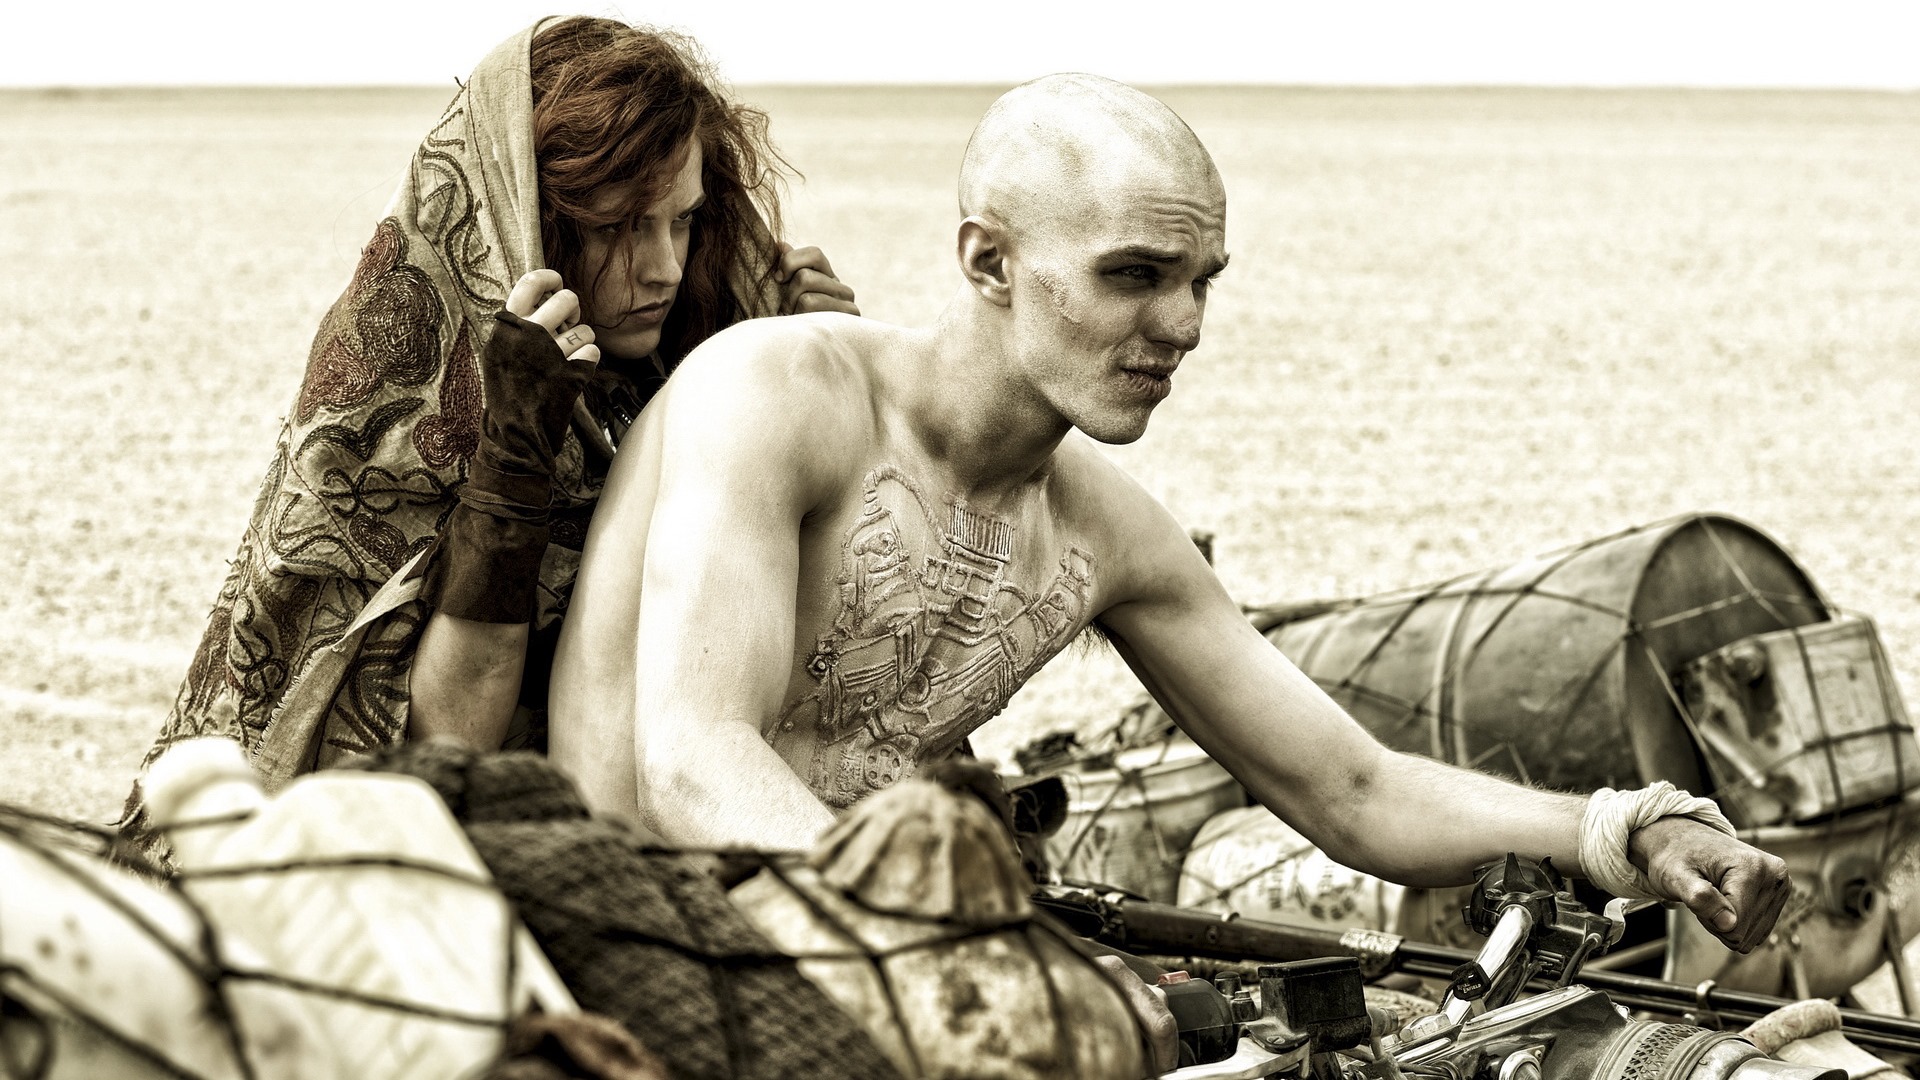 Mad Max: Fury Road, HD movie wallpapers #13 - 1920x1080